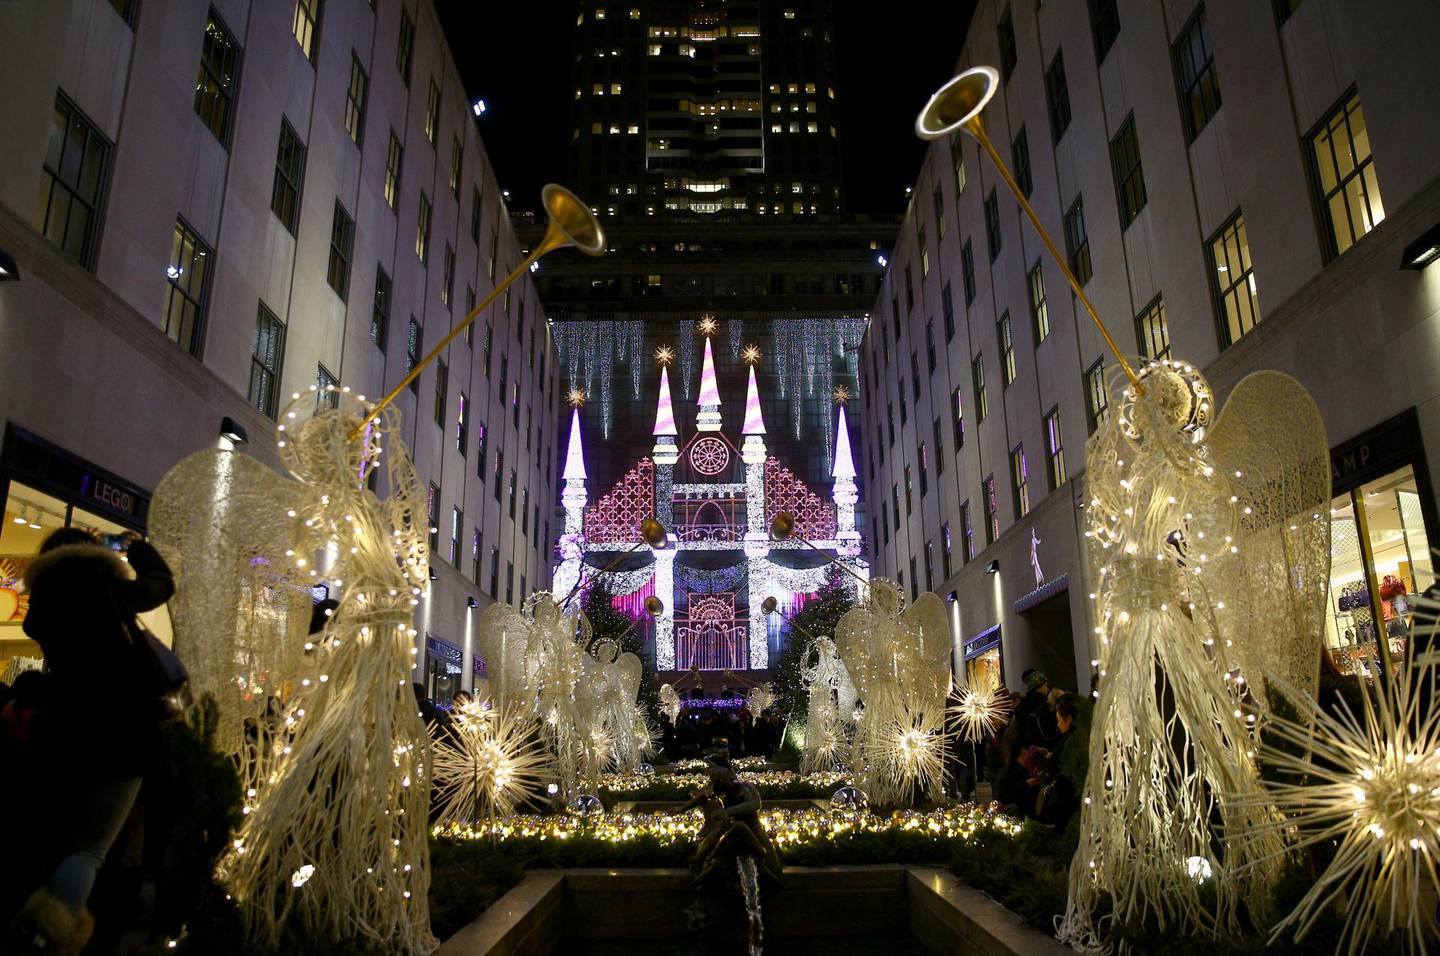 NEW YORK, USA - DECEMBER 23 : A view of illuminated decorations ahead of the Christmas at Rockefeller Center in New York, USA on December 23, 2016. Illuminated decorations are placed in streets and houses within christmas and new year preparations.  (Photo by Volkan Furuncu/Anadolu Agency/Getty Images)